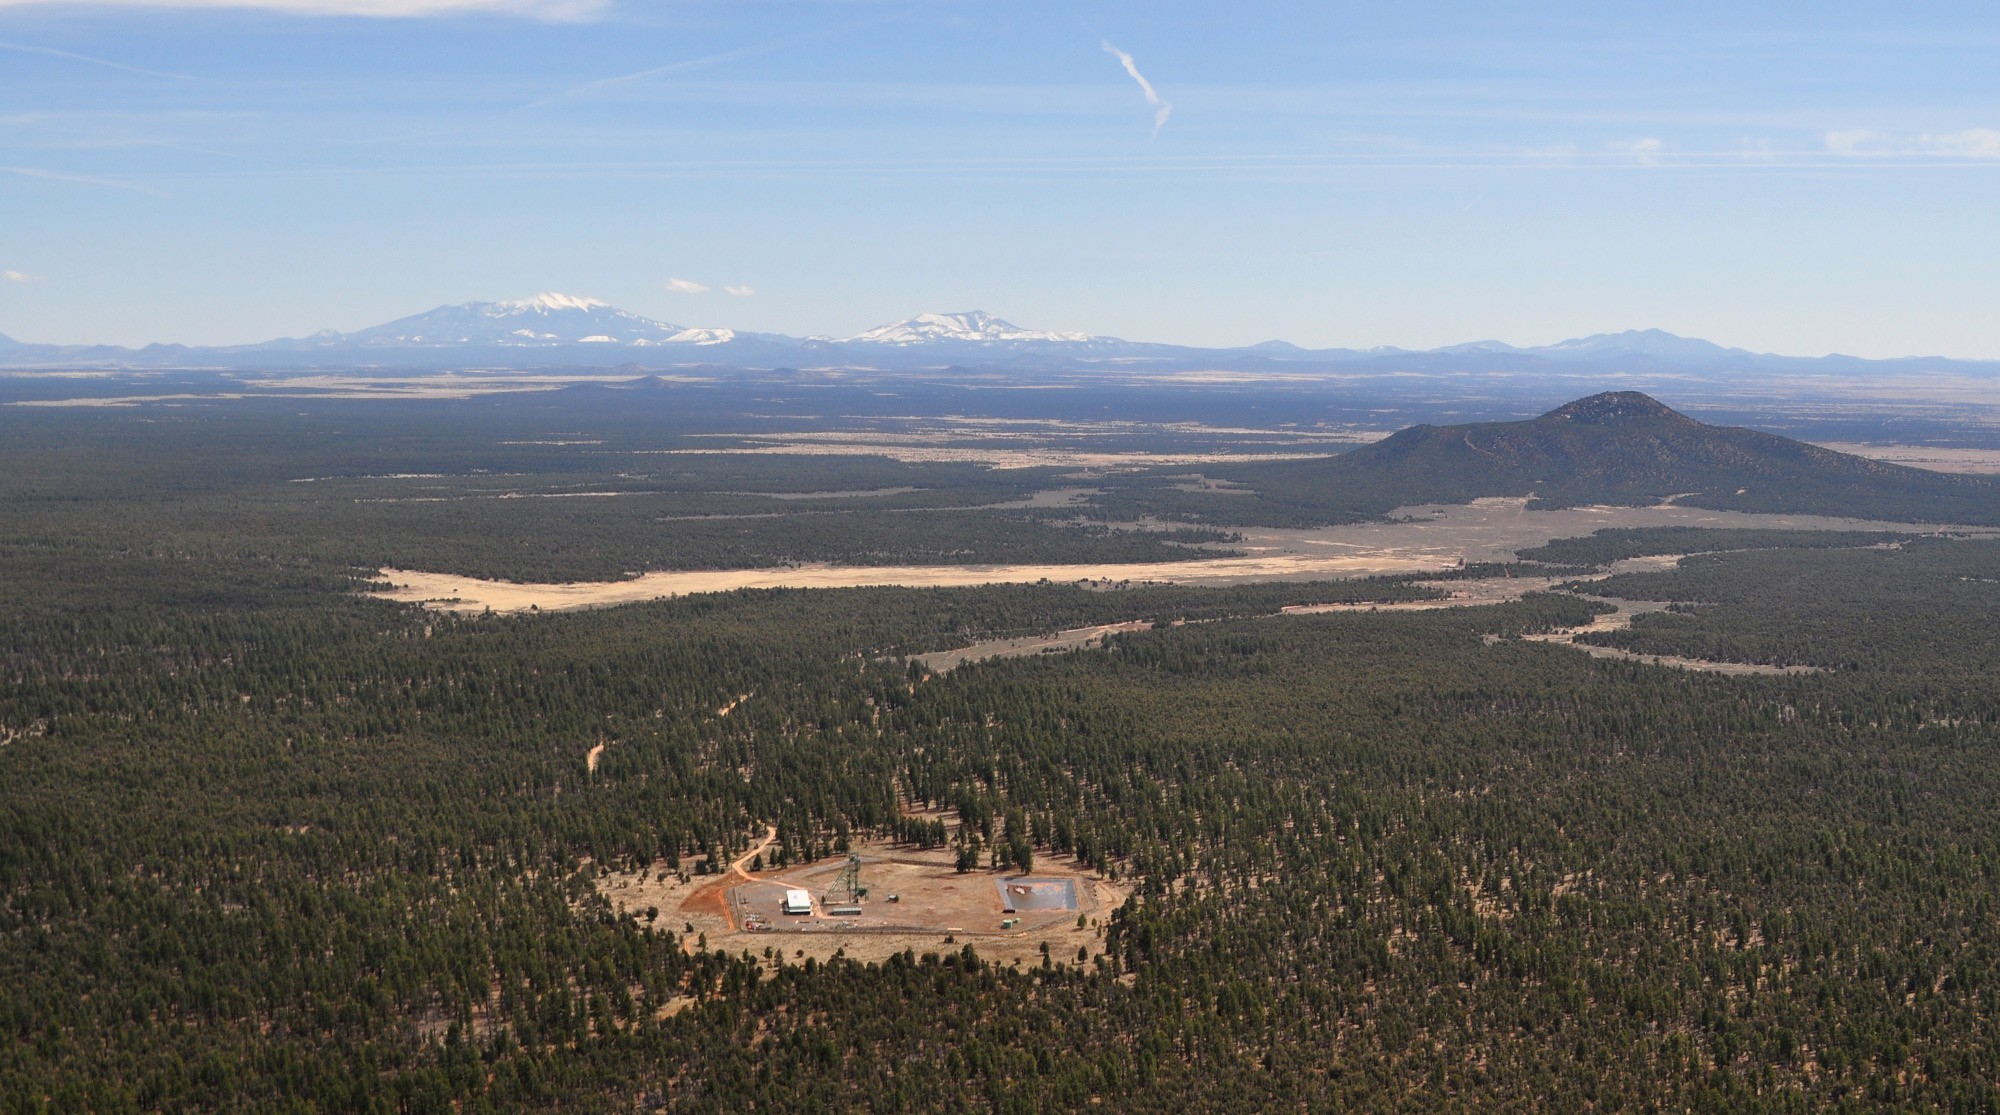 The Canyon Mine in the Kaibab National Forest south of the Grand Canyon was created in the 1980s to tap uranium deposits.